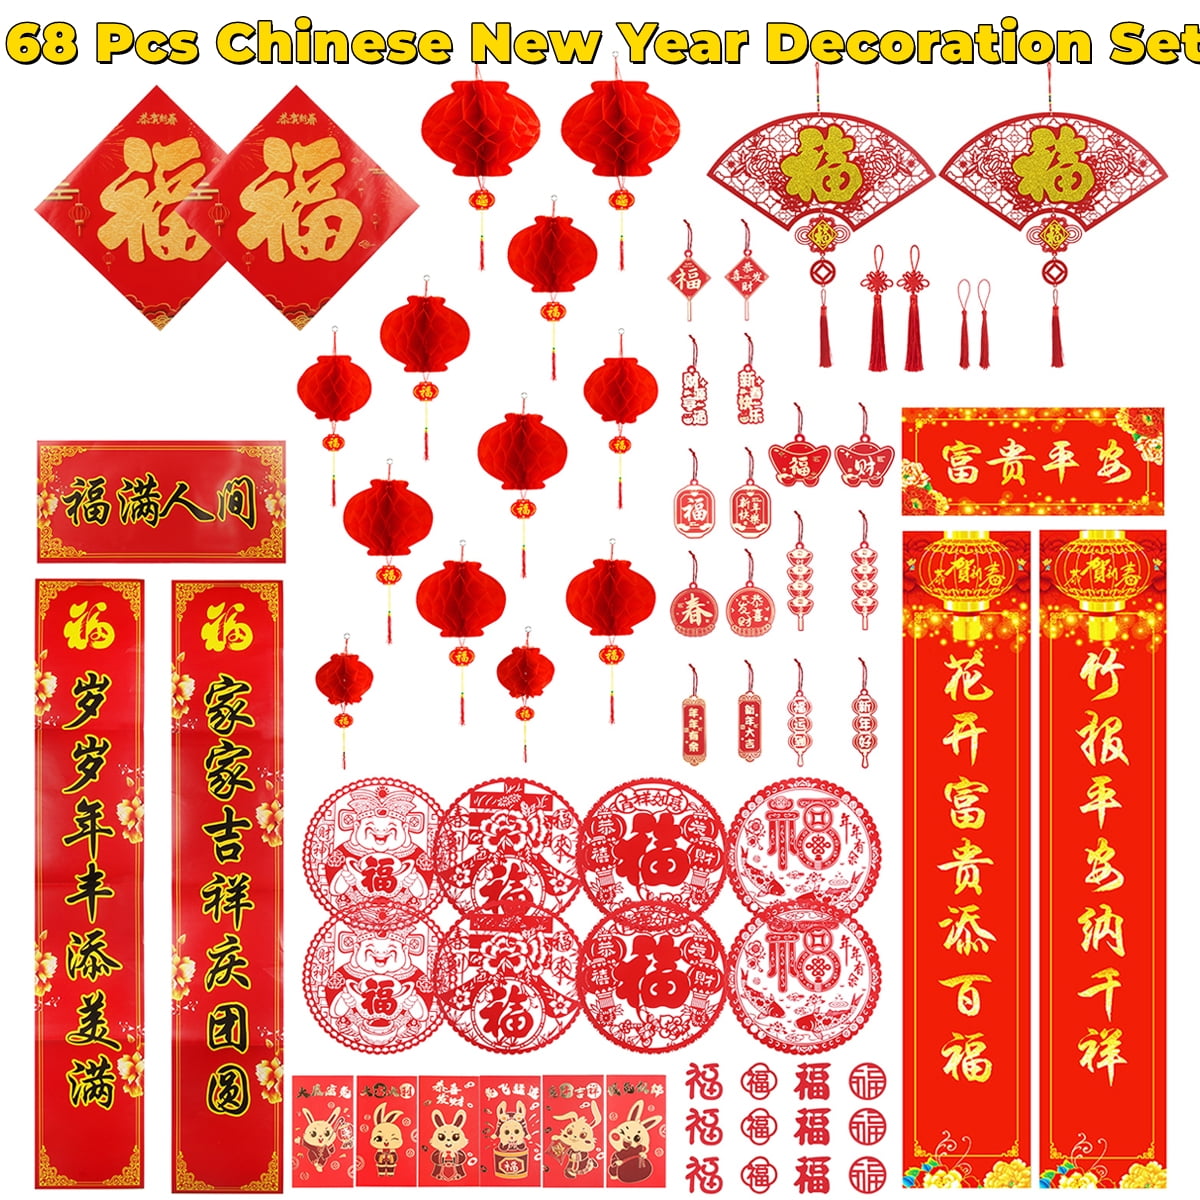 2023 Chinese New Year Decorations Set, 38 Pcs Lunar New Year Decor Red Paper-Cuts Lanterns Rabbit Red Envelopes Door Stickers Lucky Hanging Ornaments